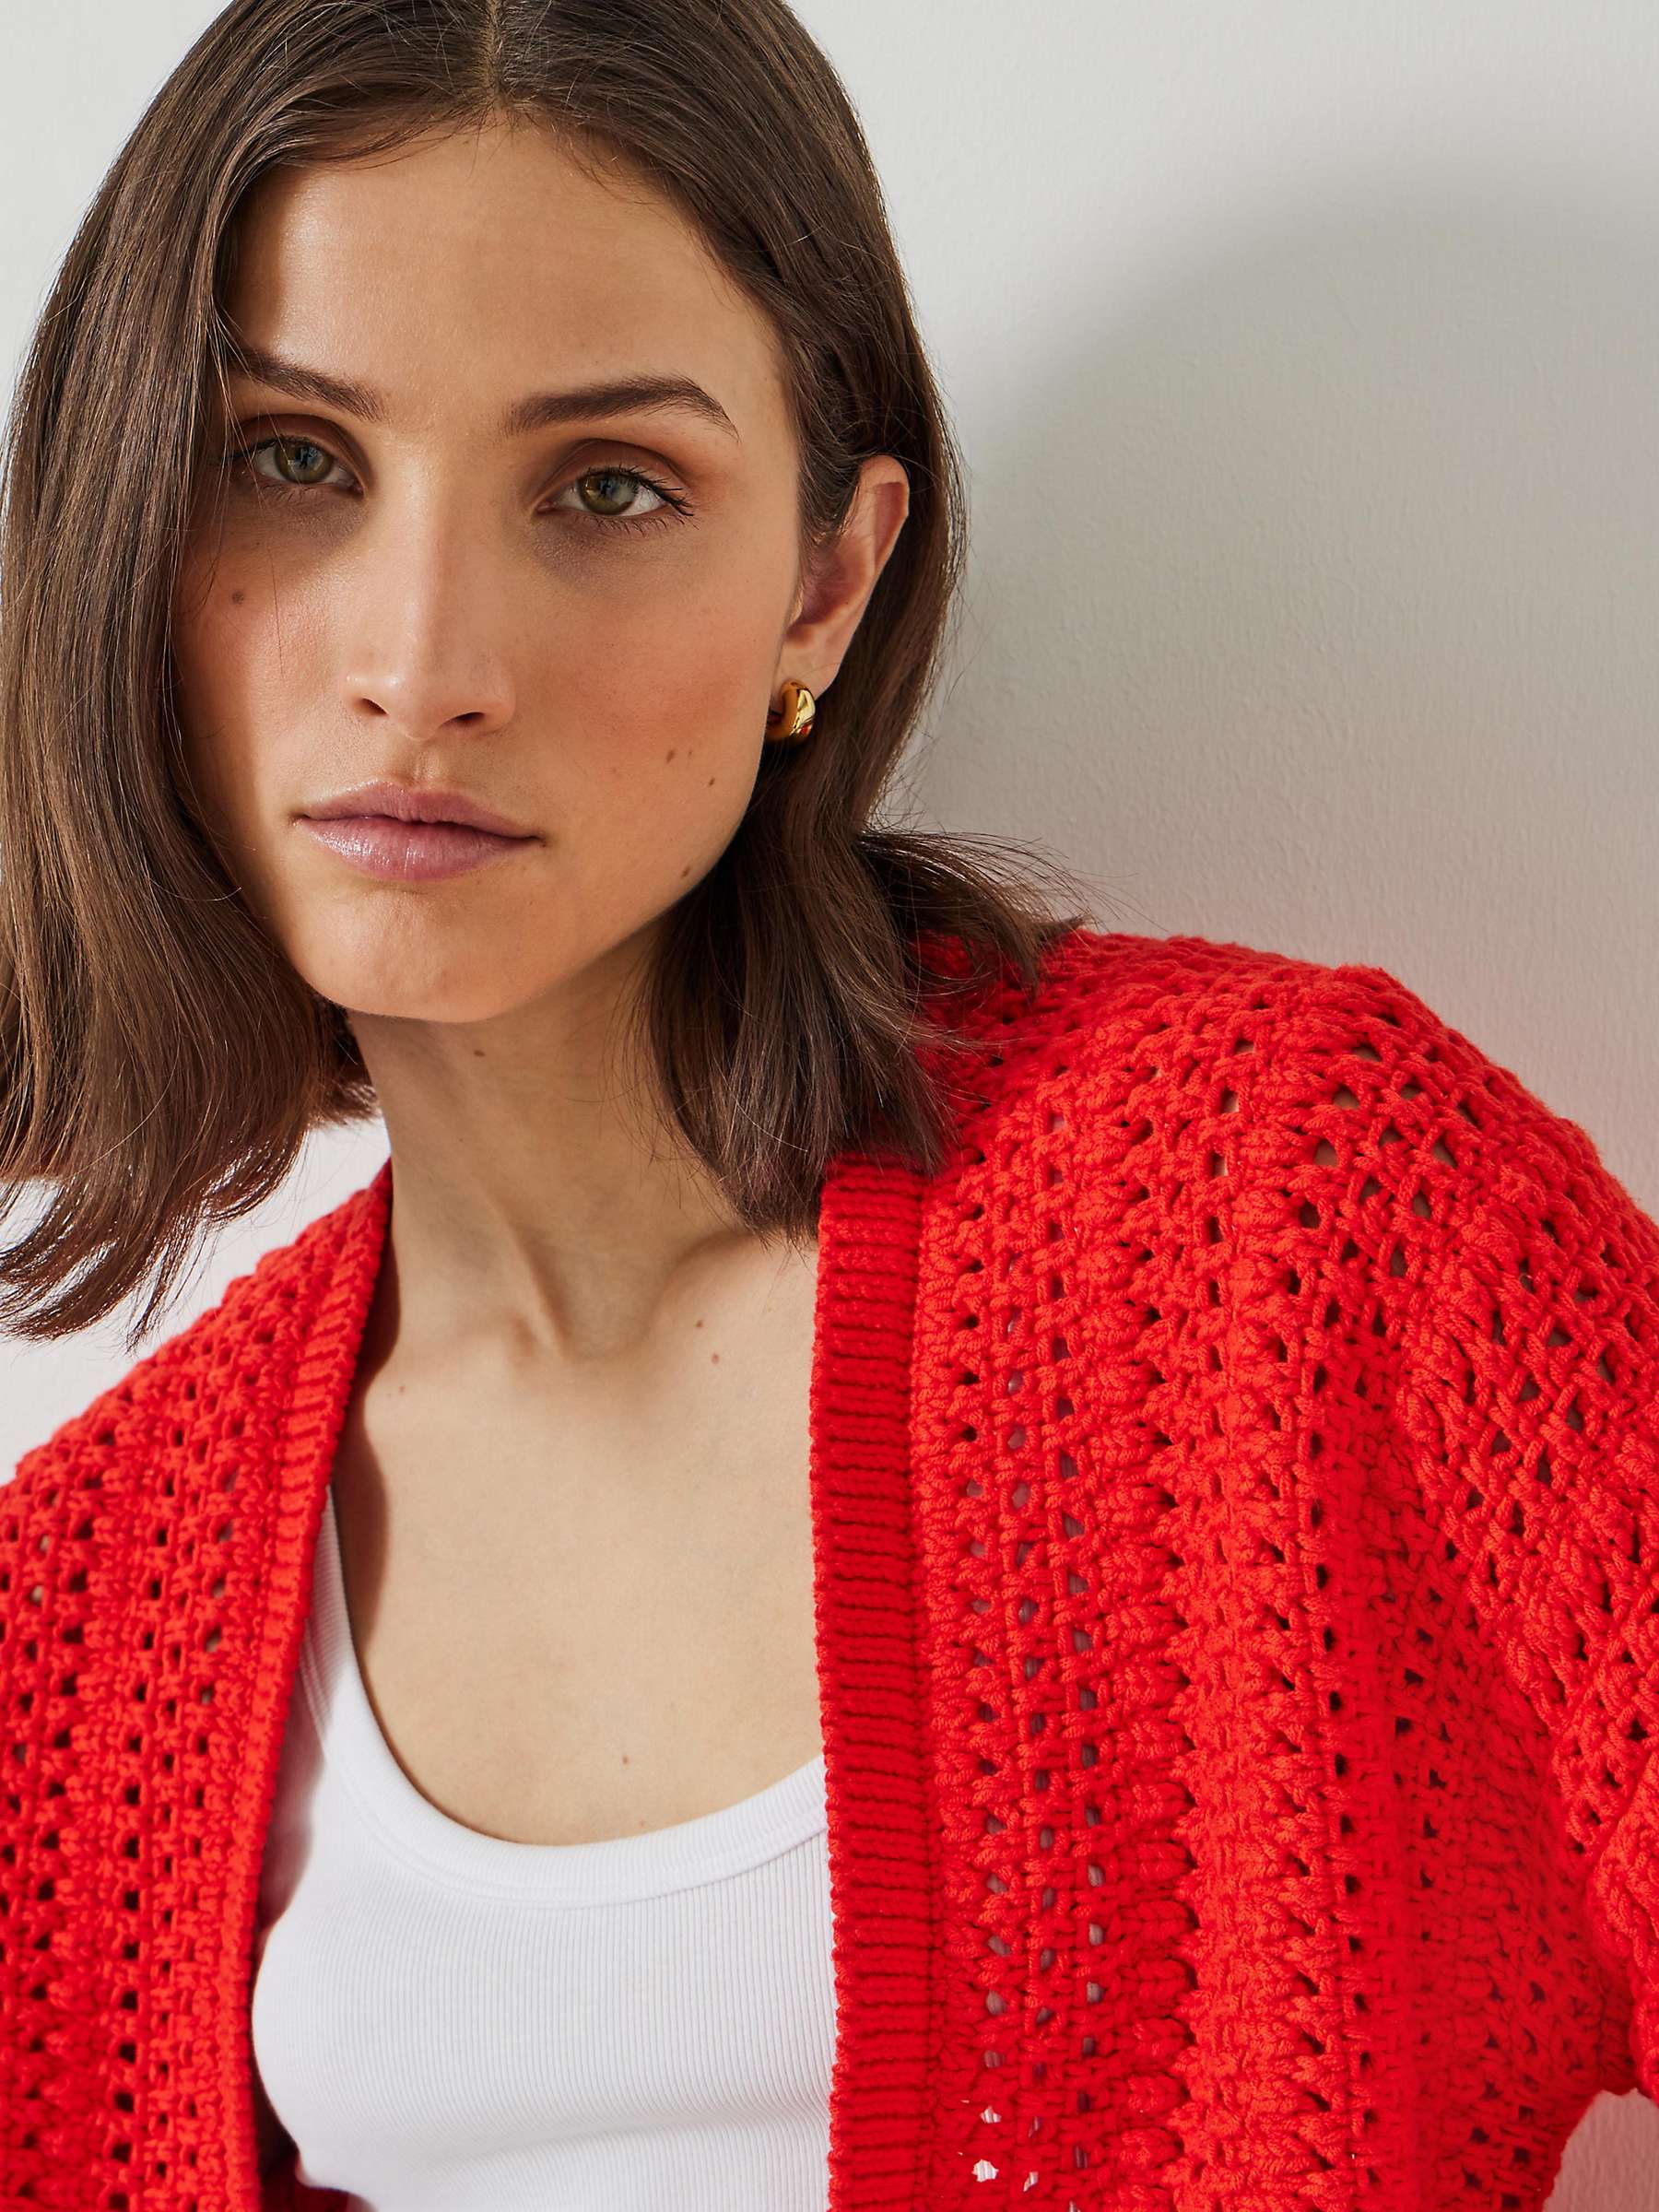 Buy HUSH Pixie Knitted Edge Cardigan Online at johnlewis.com